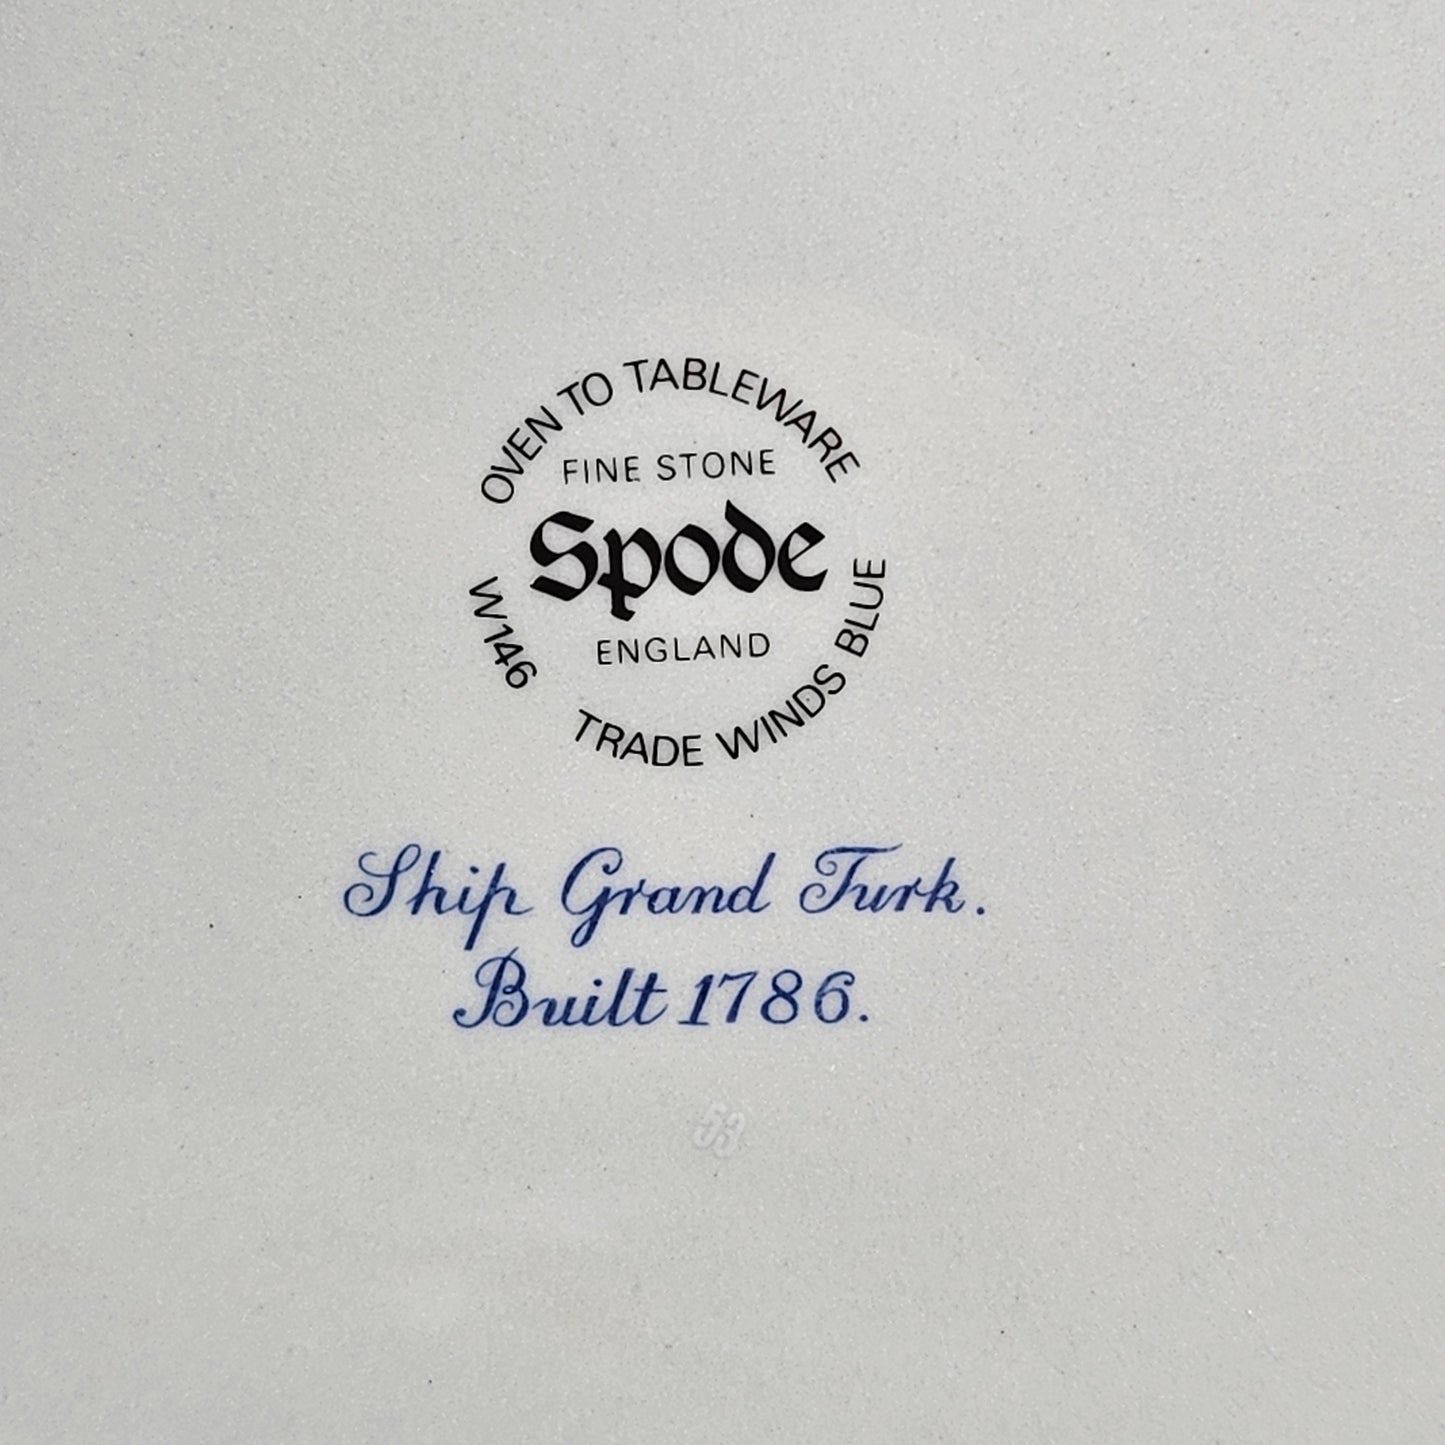 Spode Blue Trade Winds Dinner Plates - Eight Available